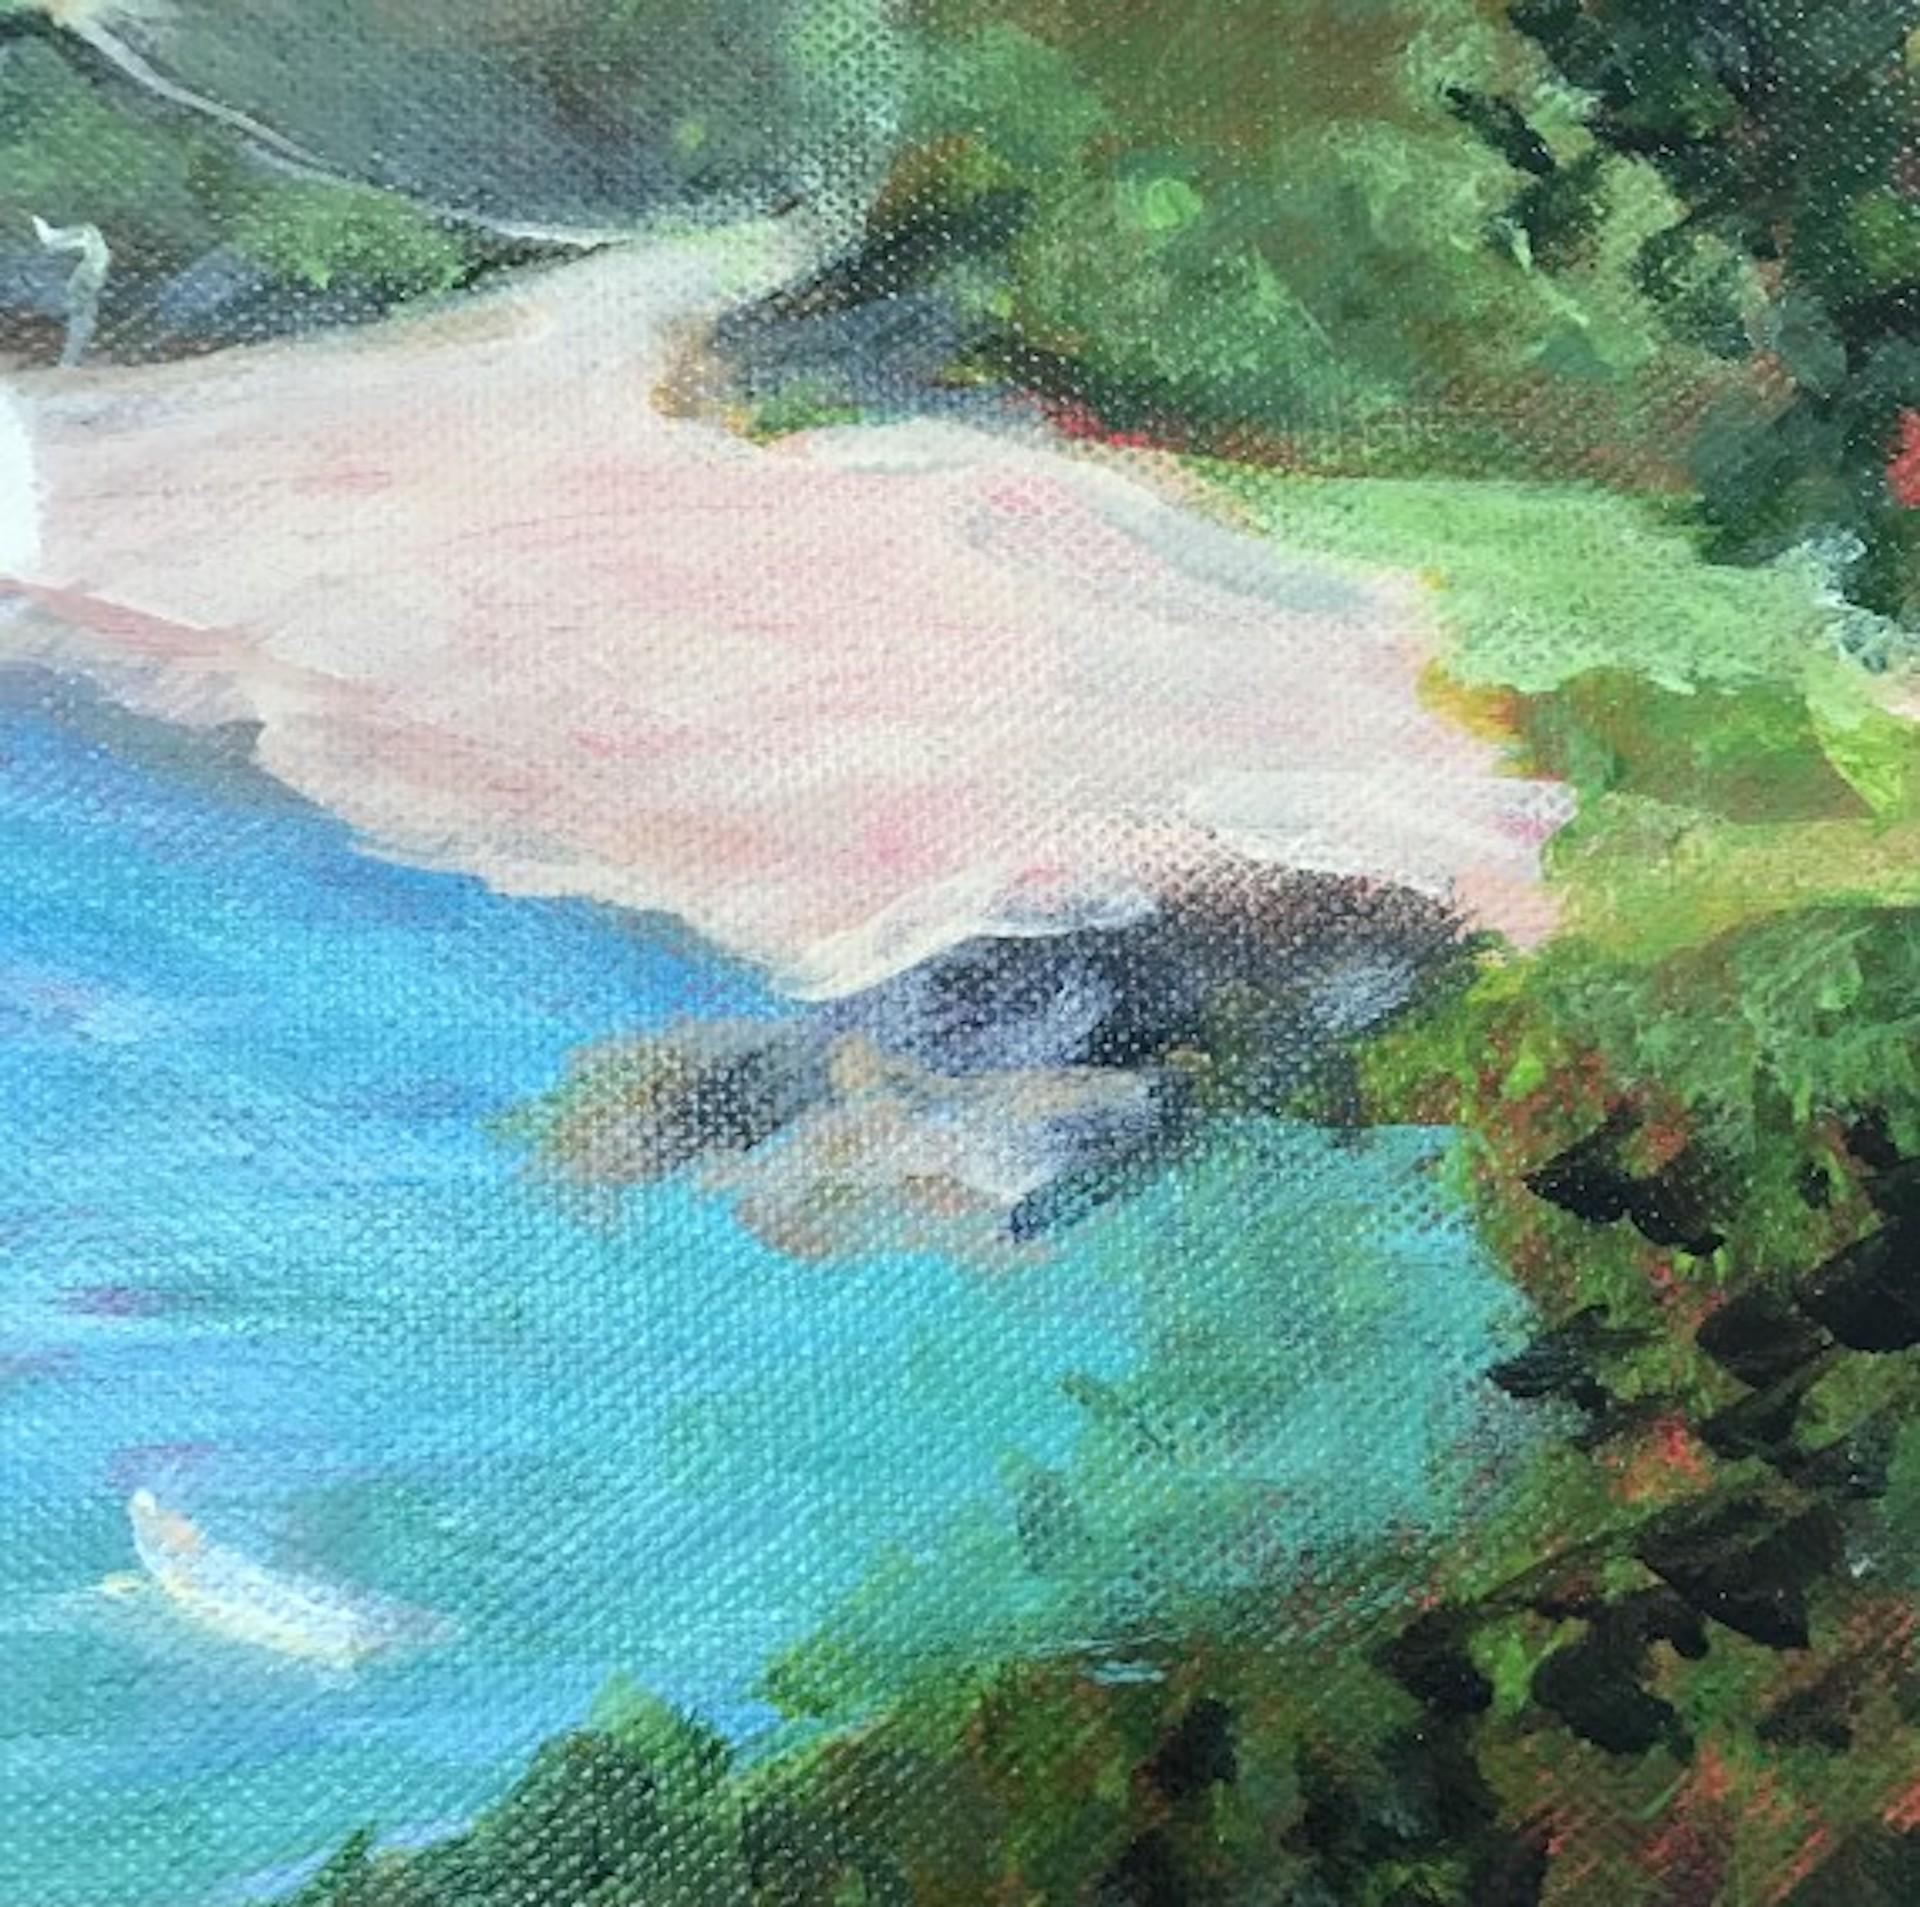 Sunny Cove, Salcombe [2021]
Original
Landscapes and seascapes
Acrylic on Canvas
Image size: H:50 cm x W:50 cm
Complete Size of Unframed Work: H:50 cm x W:50 cm x D:2cm
Sold Unframed
Please note that insitu images are purely an indication of how a